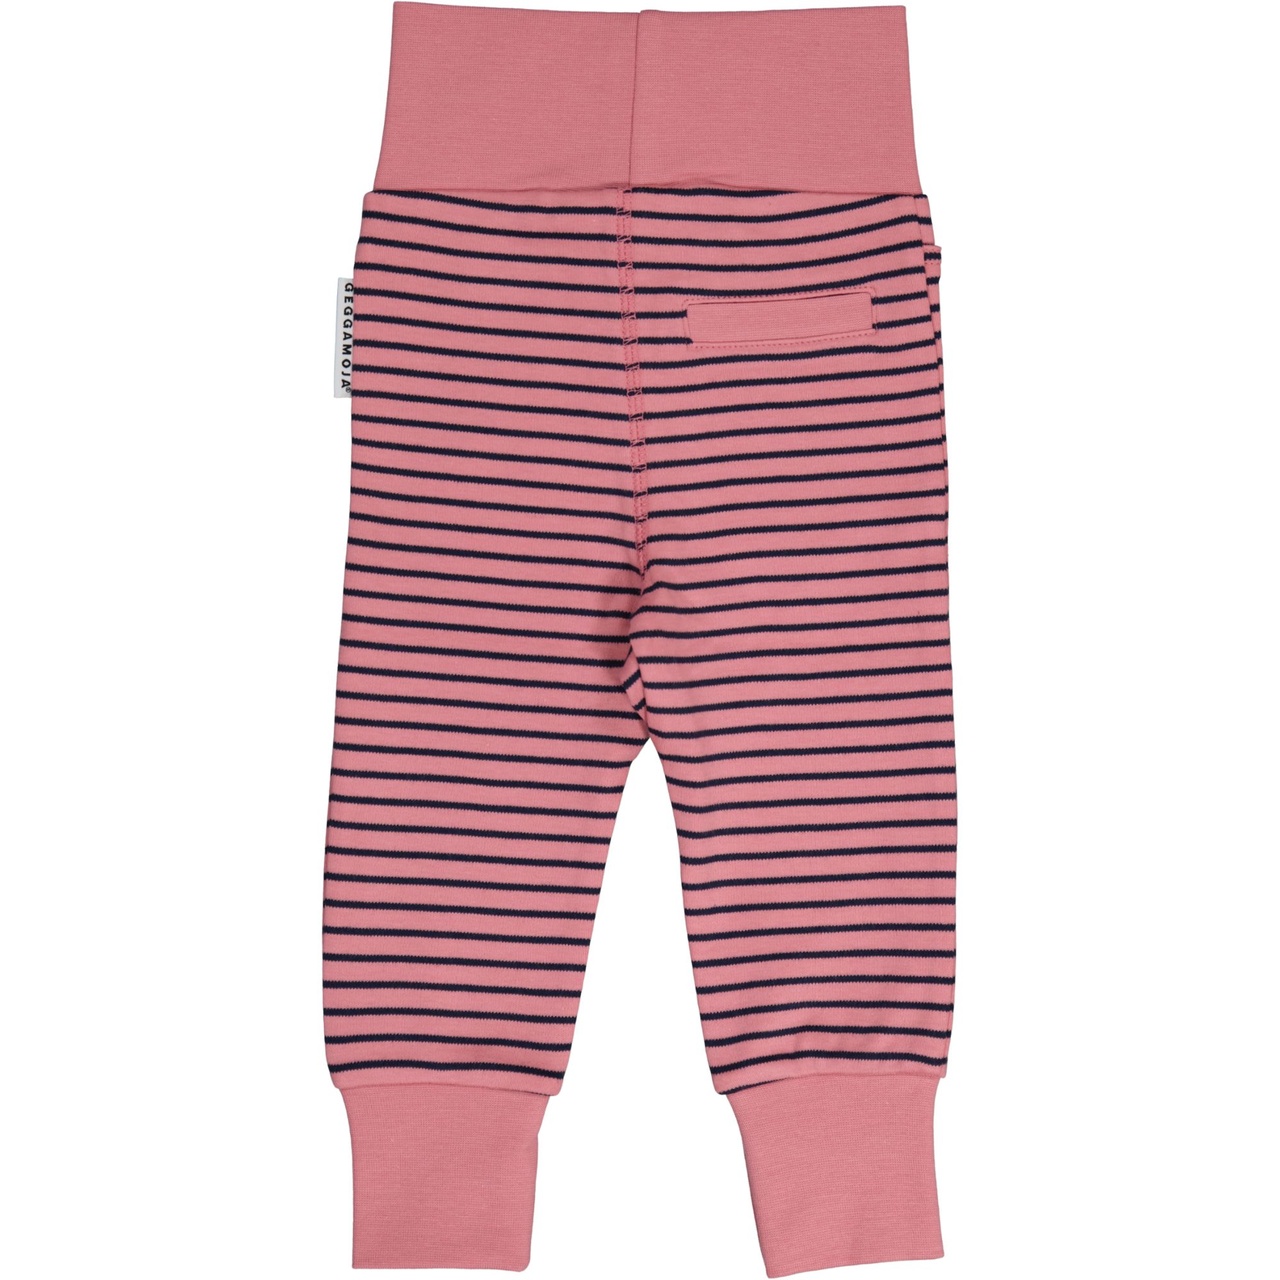 Baby trouser Pink/navy 62/68